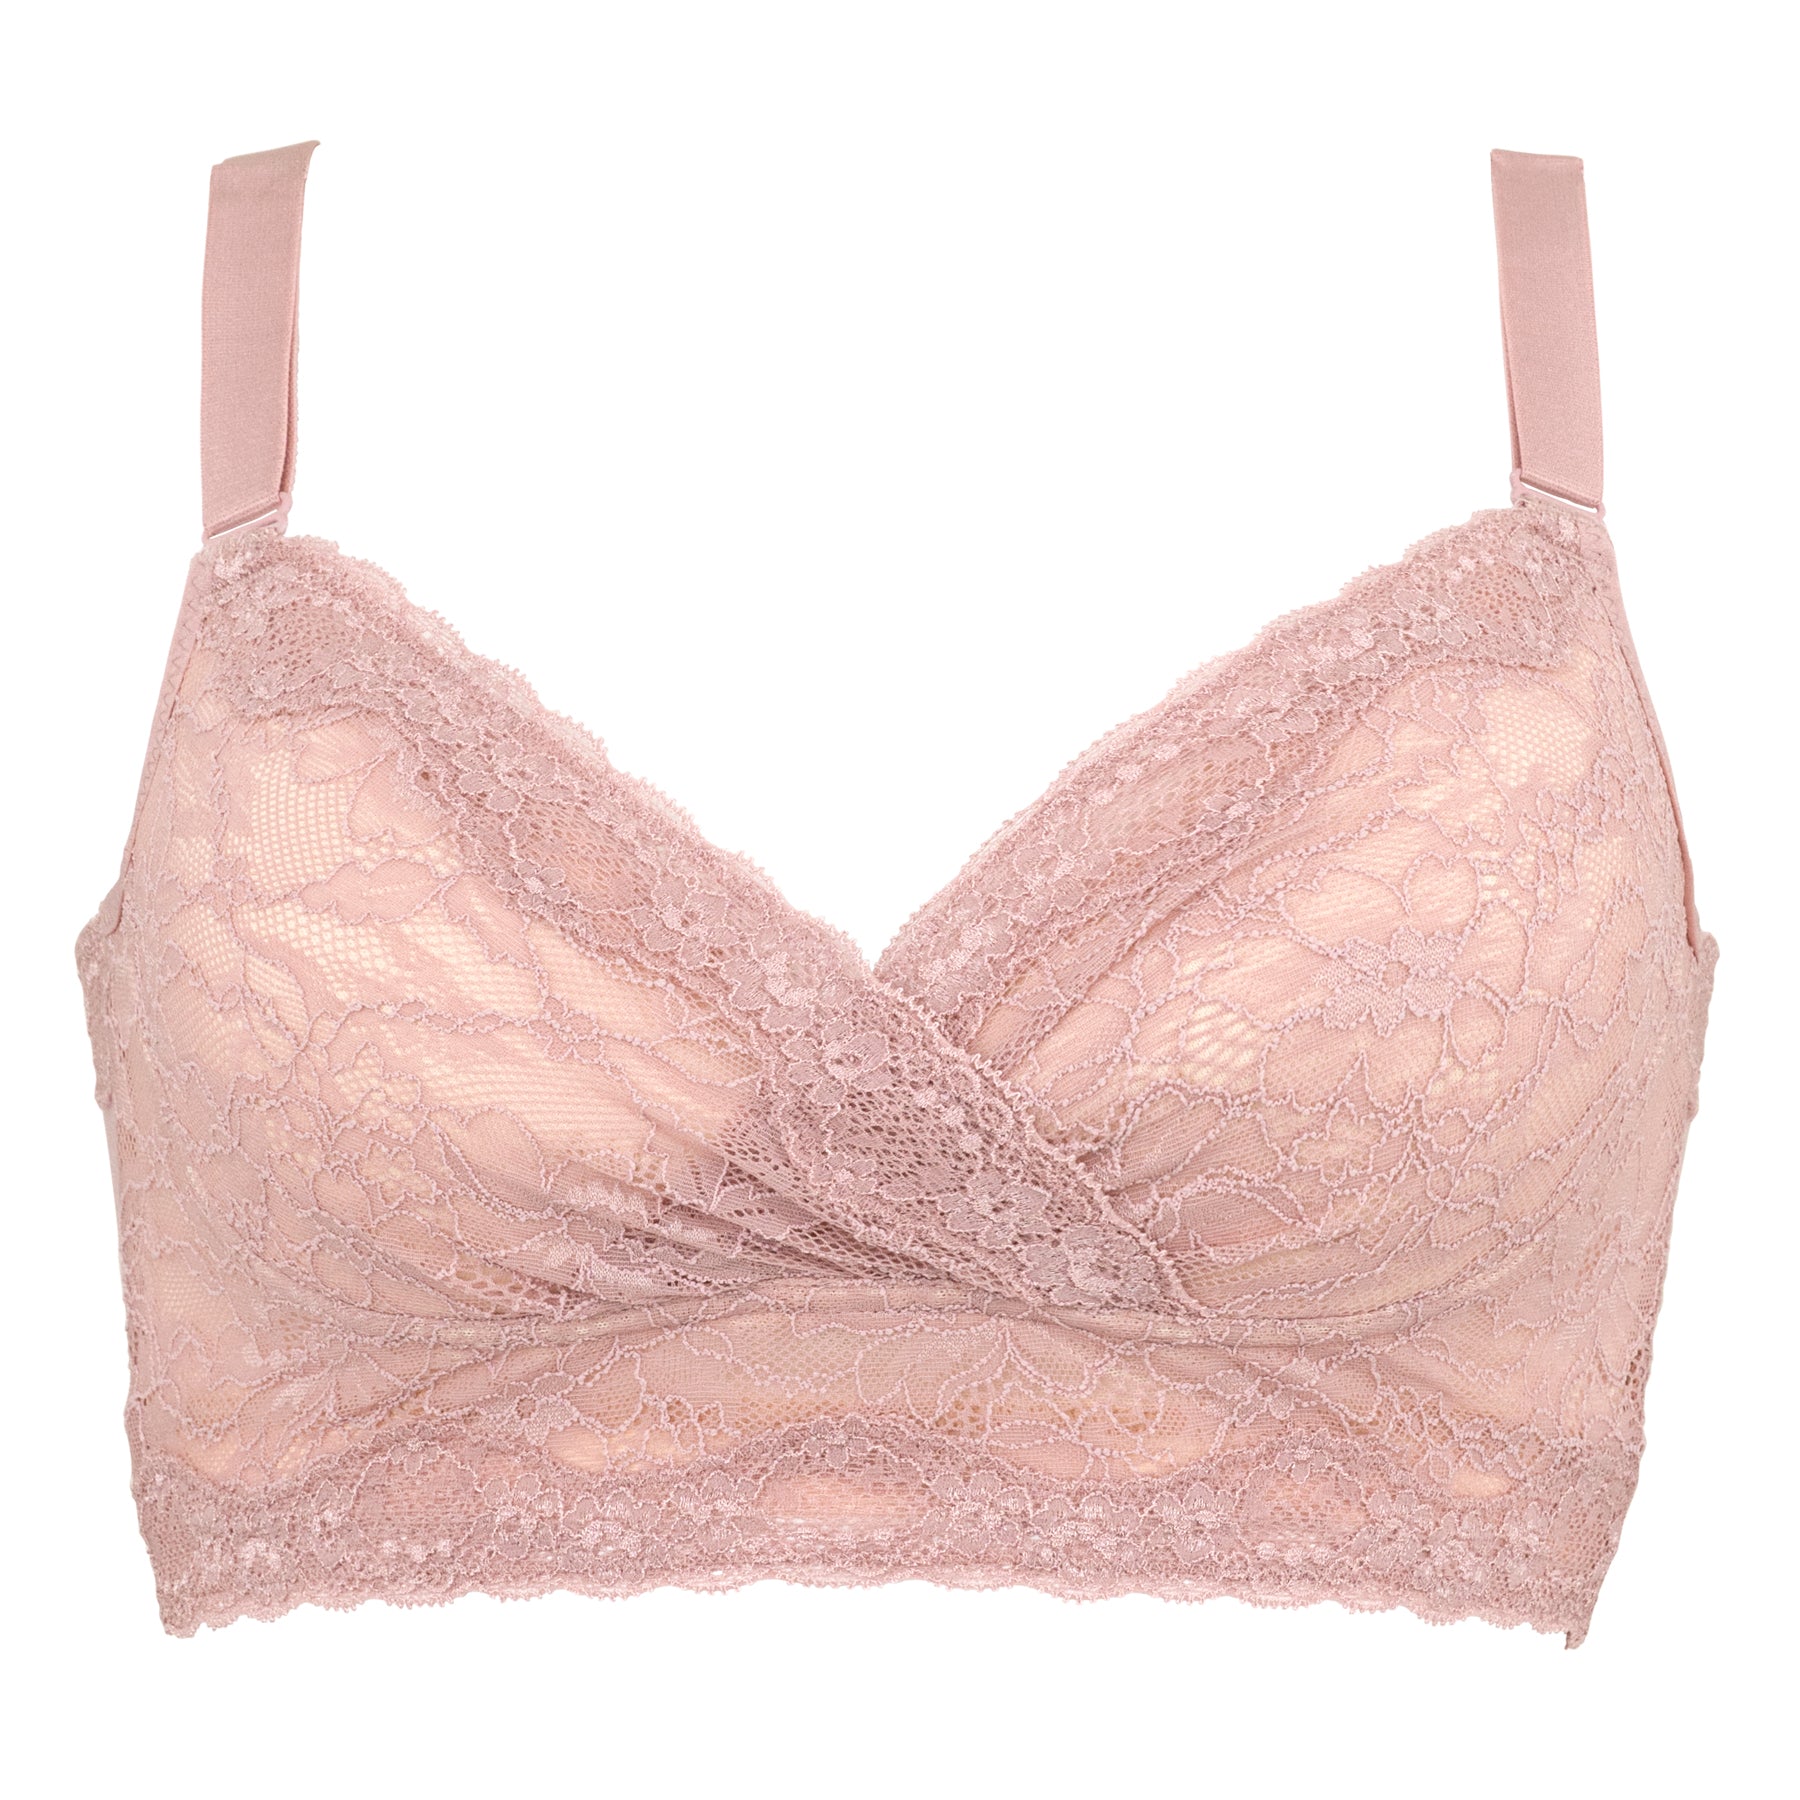 Experience a personalized bra fitting #Find A Better Fit with Bradelis 